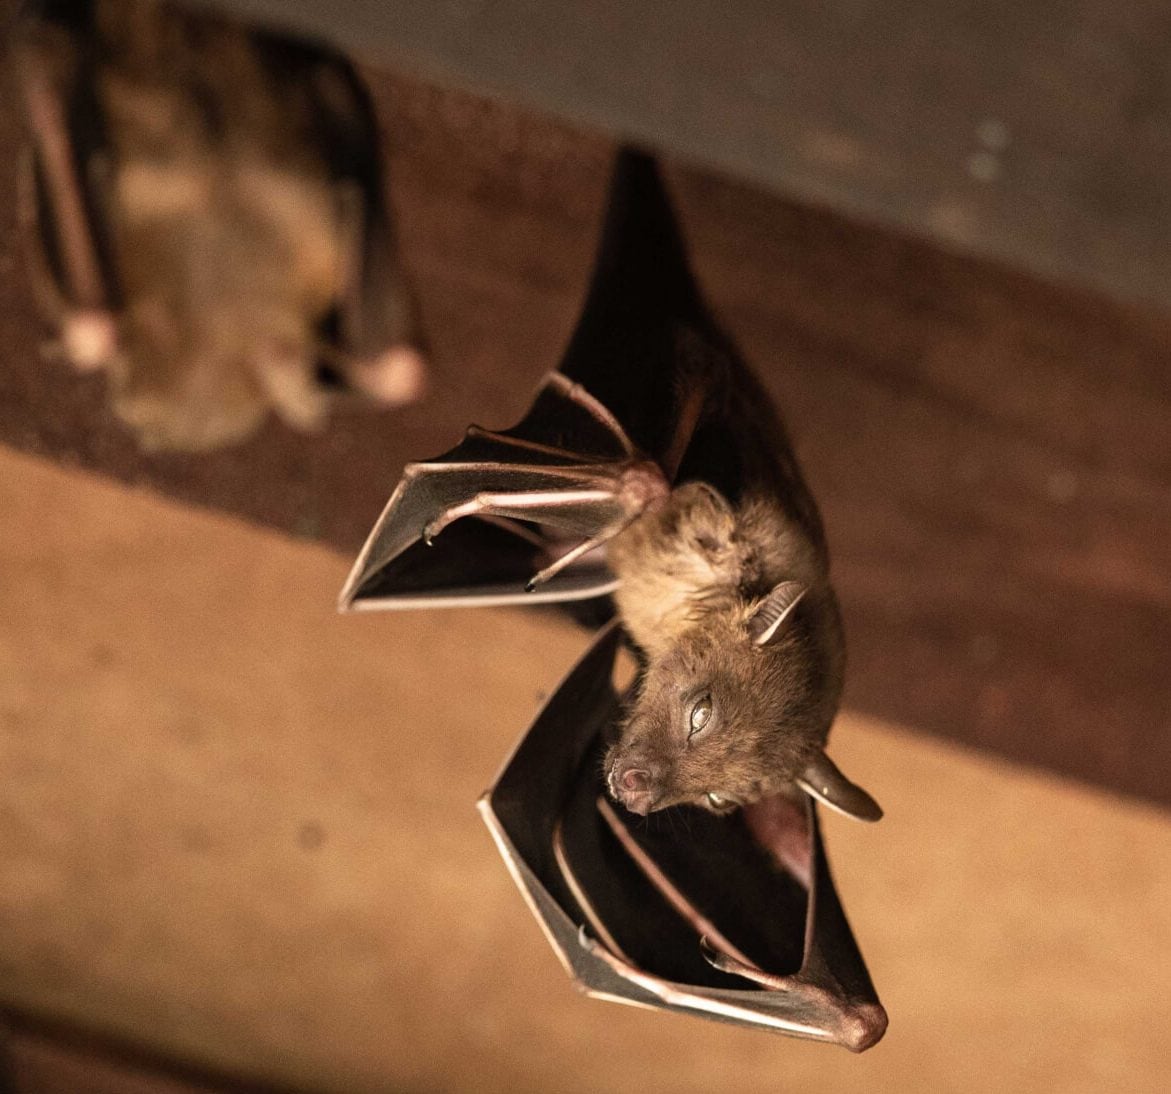 Bat removal services from wildlife removal experts in Merrimack, New Hampshire